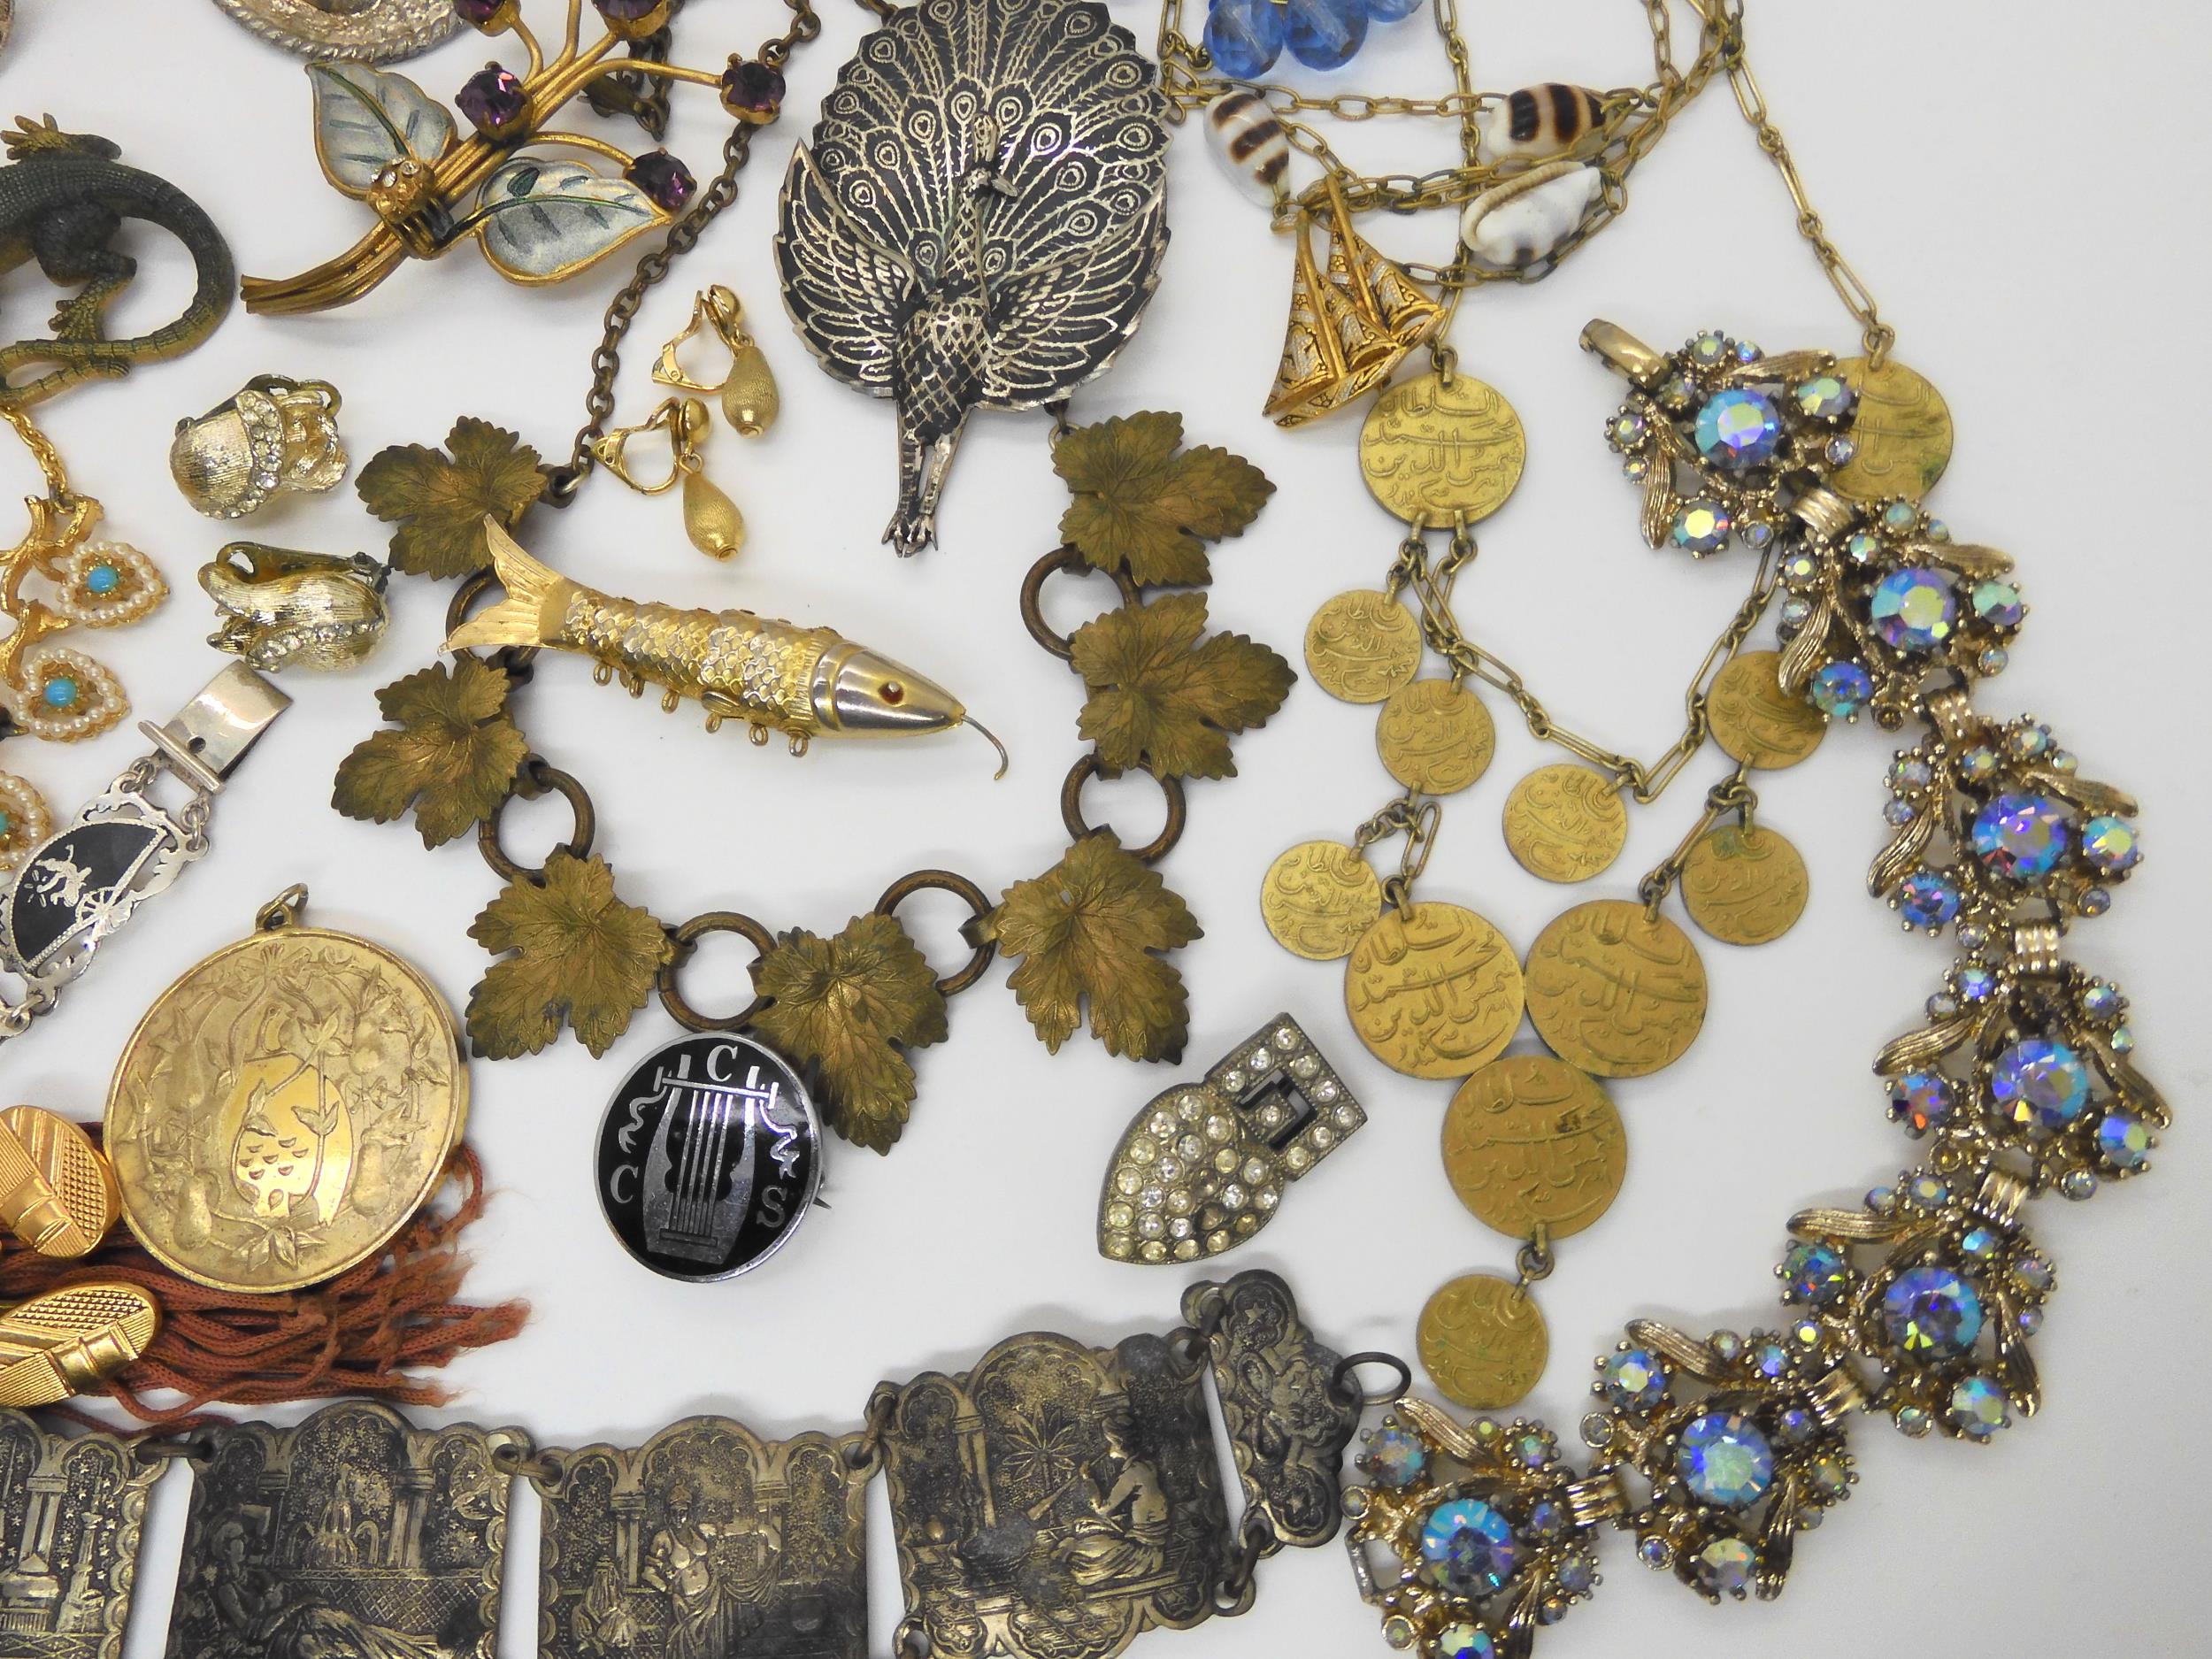 A silver gilt 'Partridge in a pear tree' pendant, a Siam wear peacock brooch and other items - Image 3 of 5